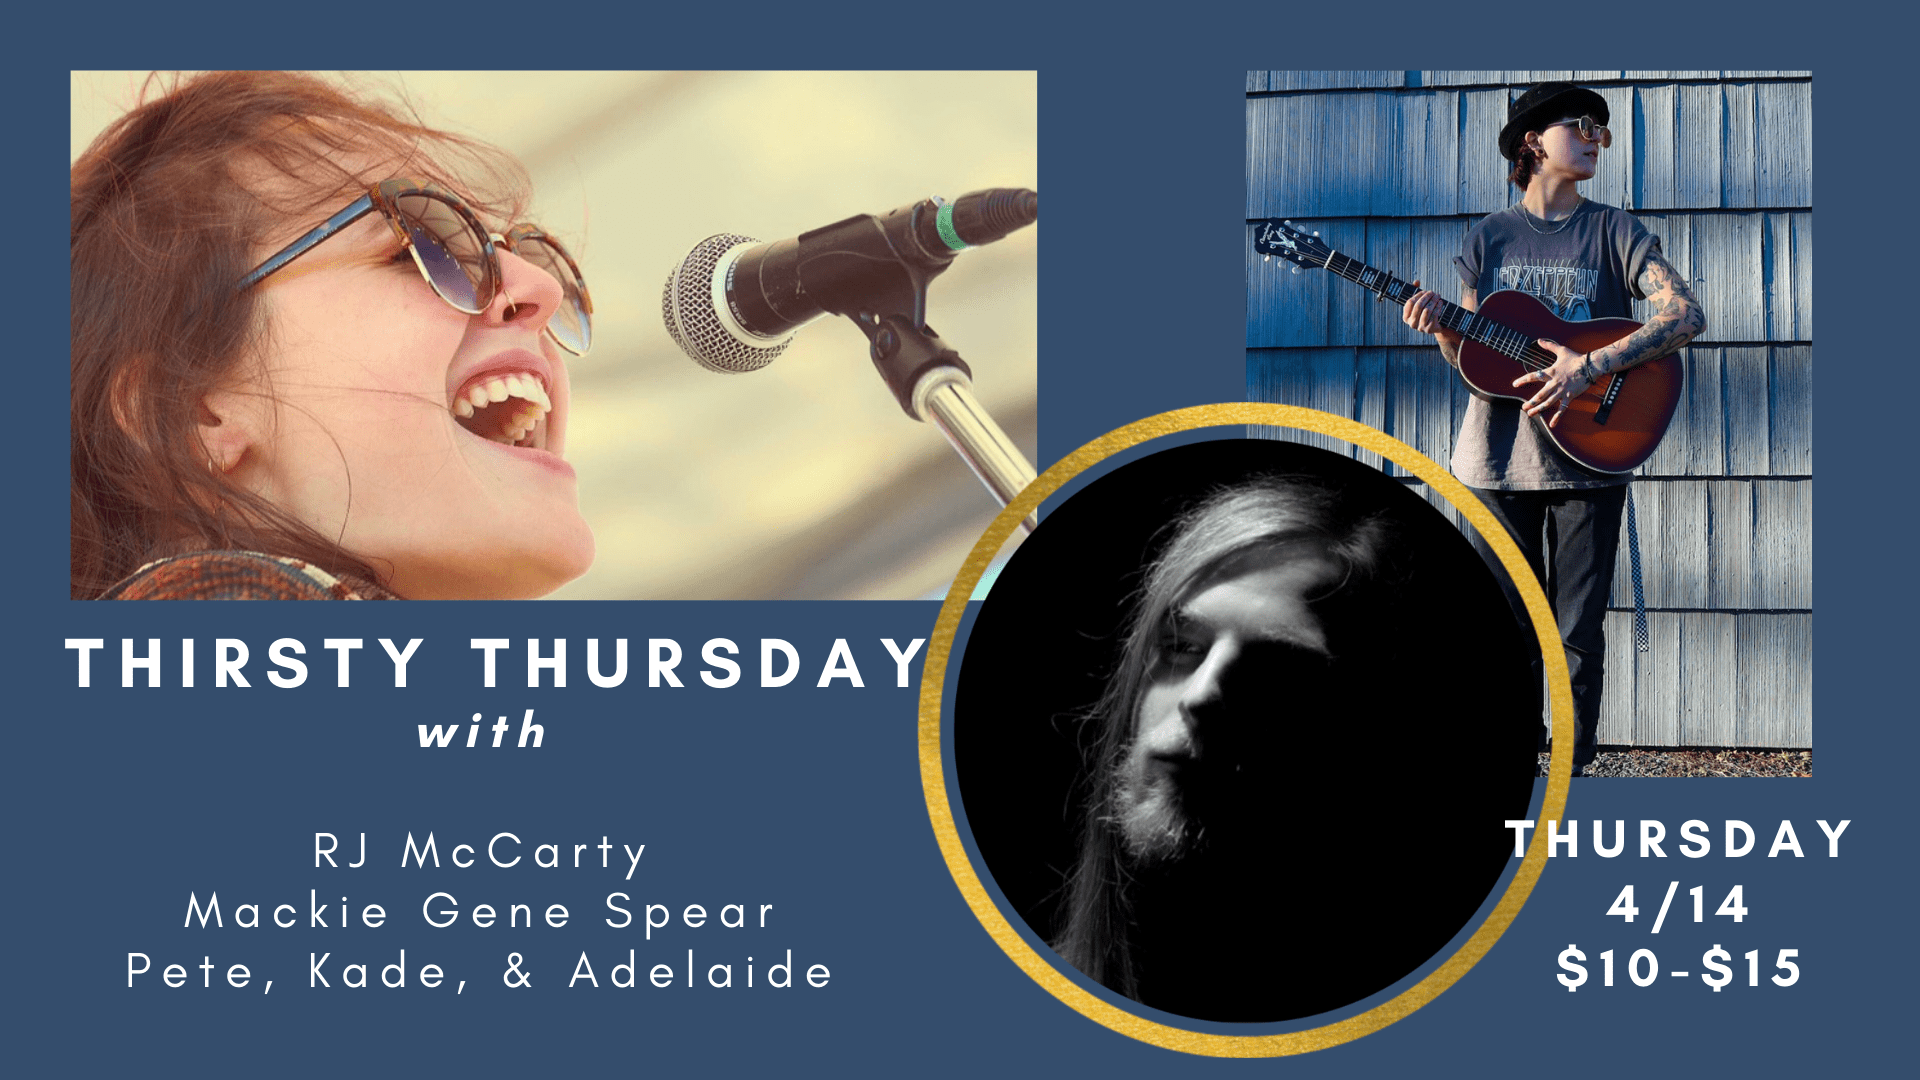 Thirsty Thursday with RJ McCarty//Mackie Gene Spear//Pete, Kade, & Adelaide